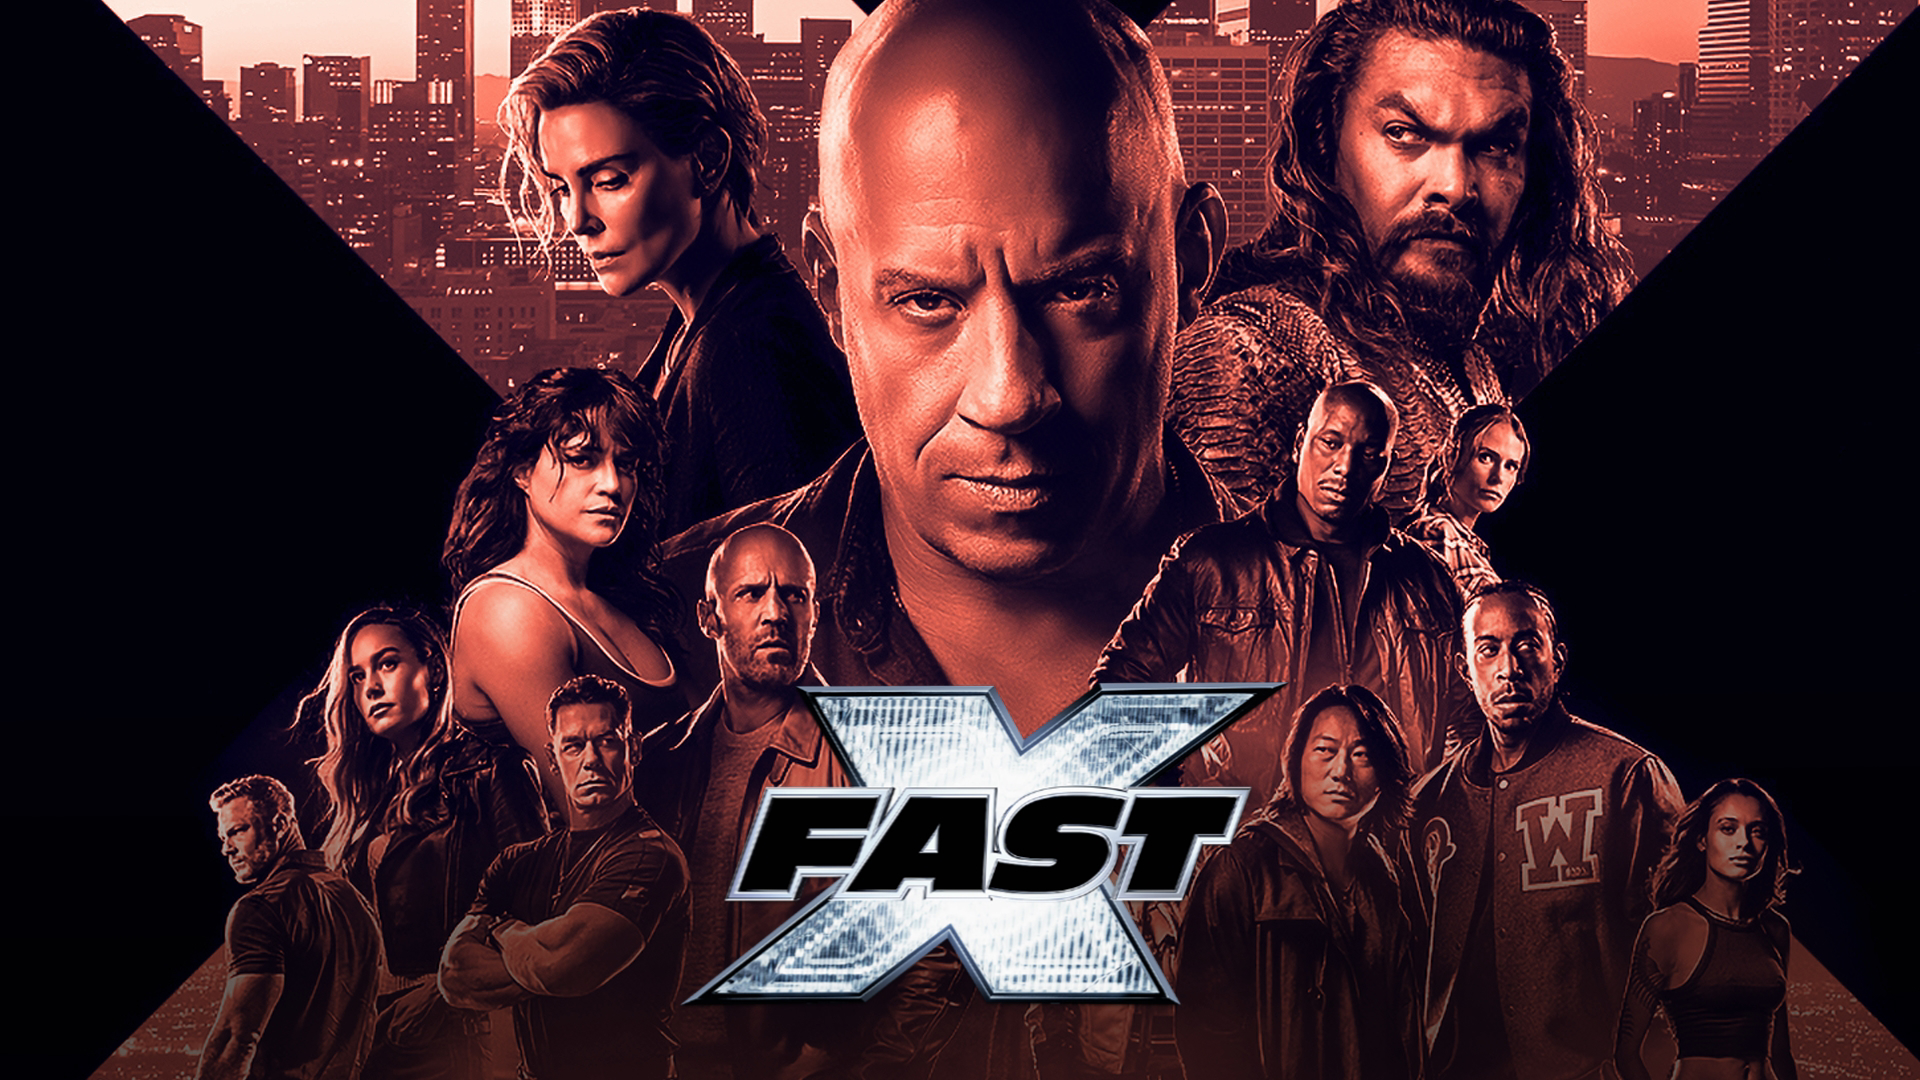 Dom Toretto and the family are back to drive cars across the world and also Jason Momoa plays Bugs Bunny The Joker in an otherwise okay Fast saga movie.